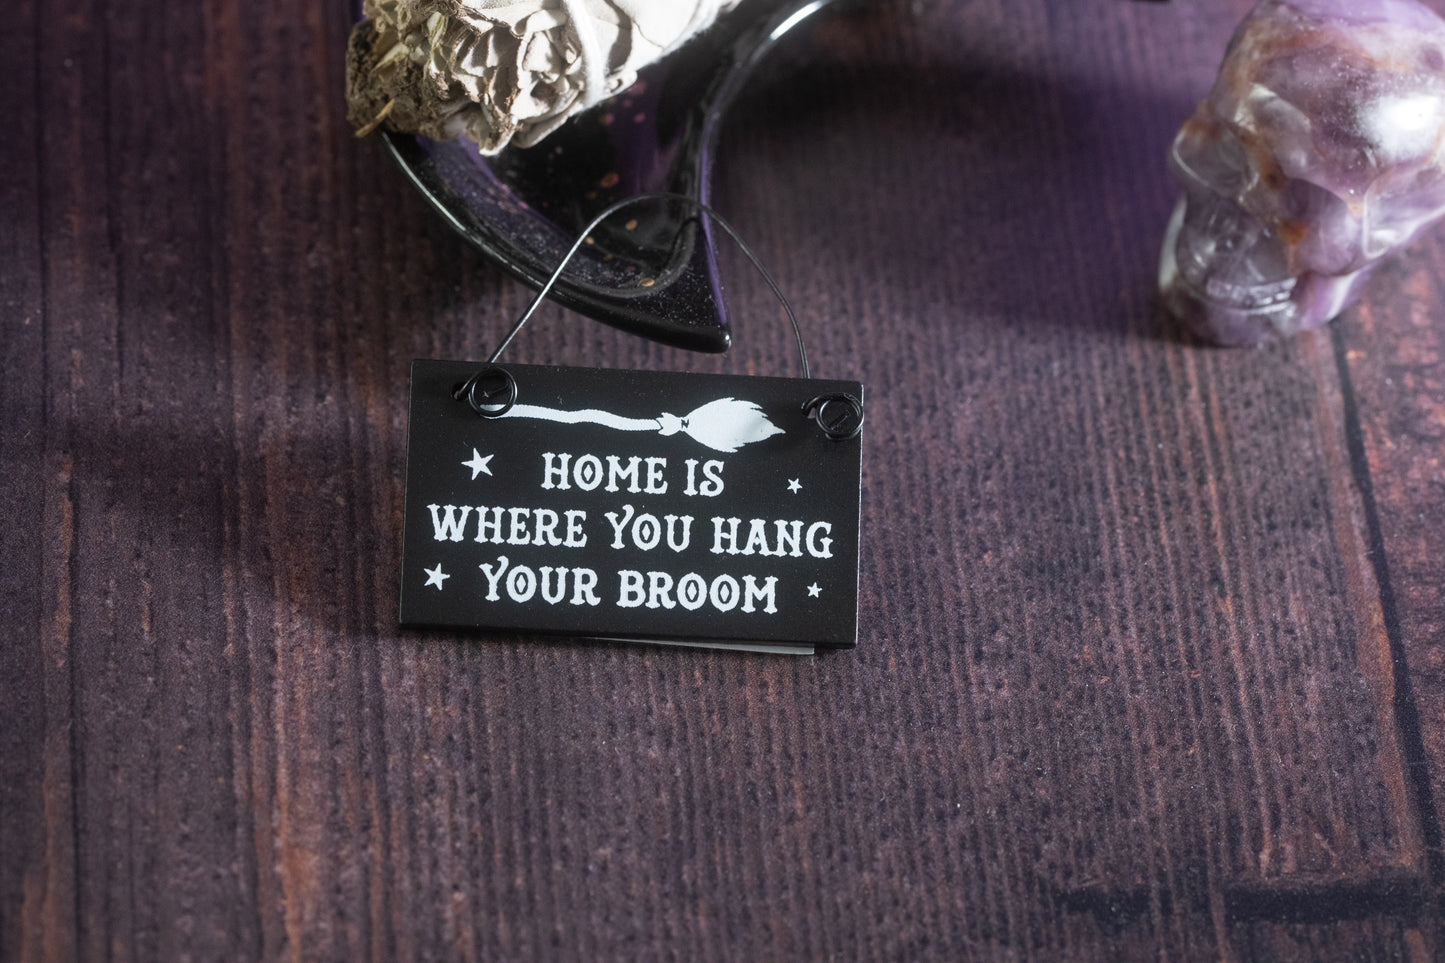 Witchy Hanging Mini Signs